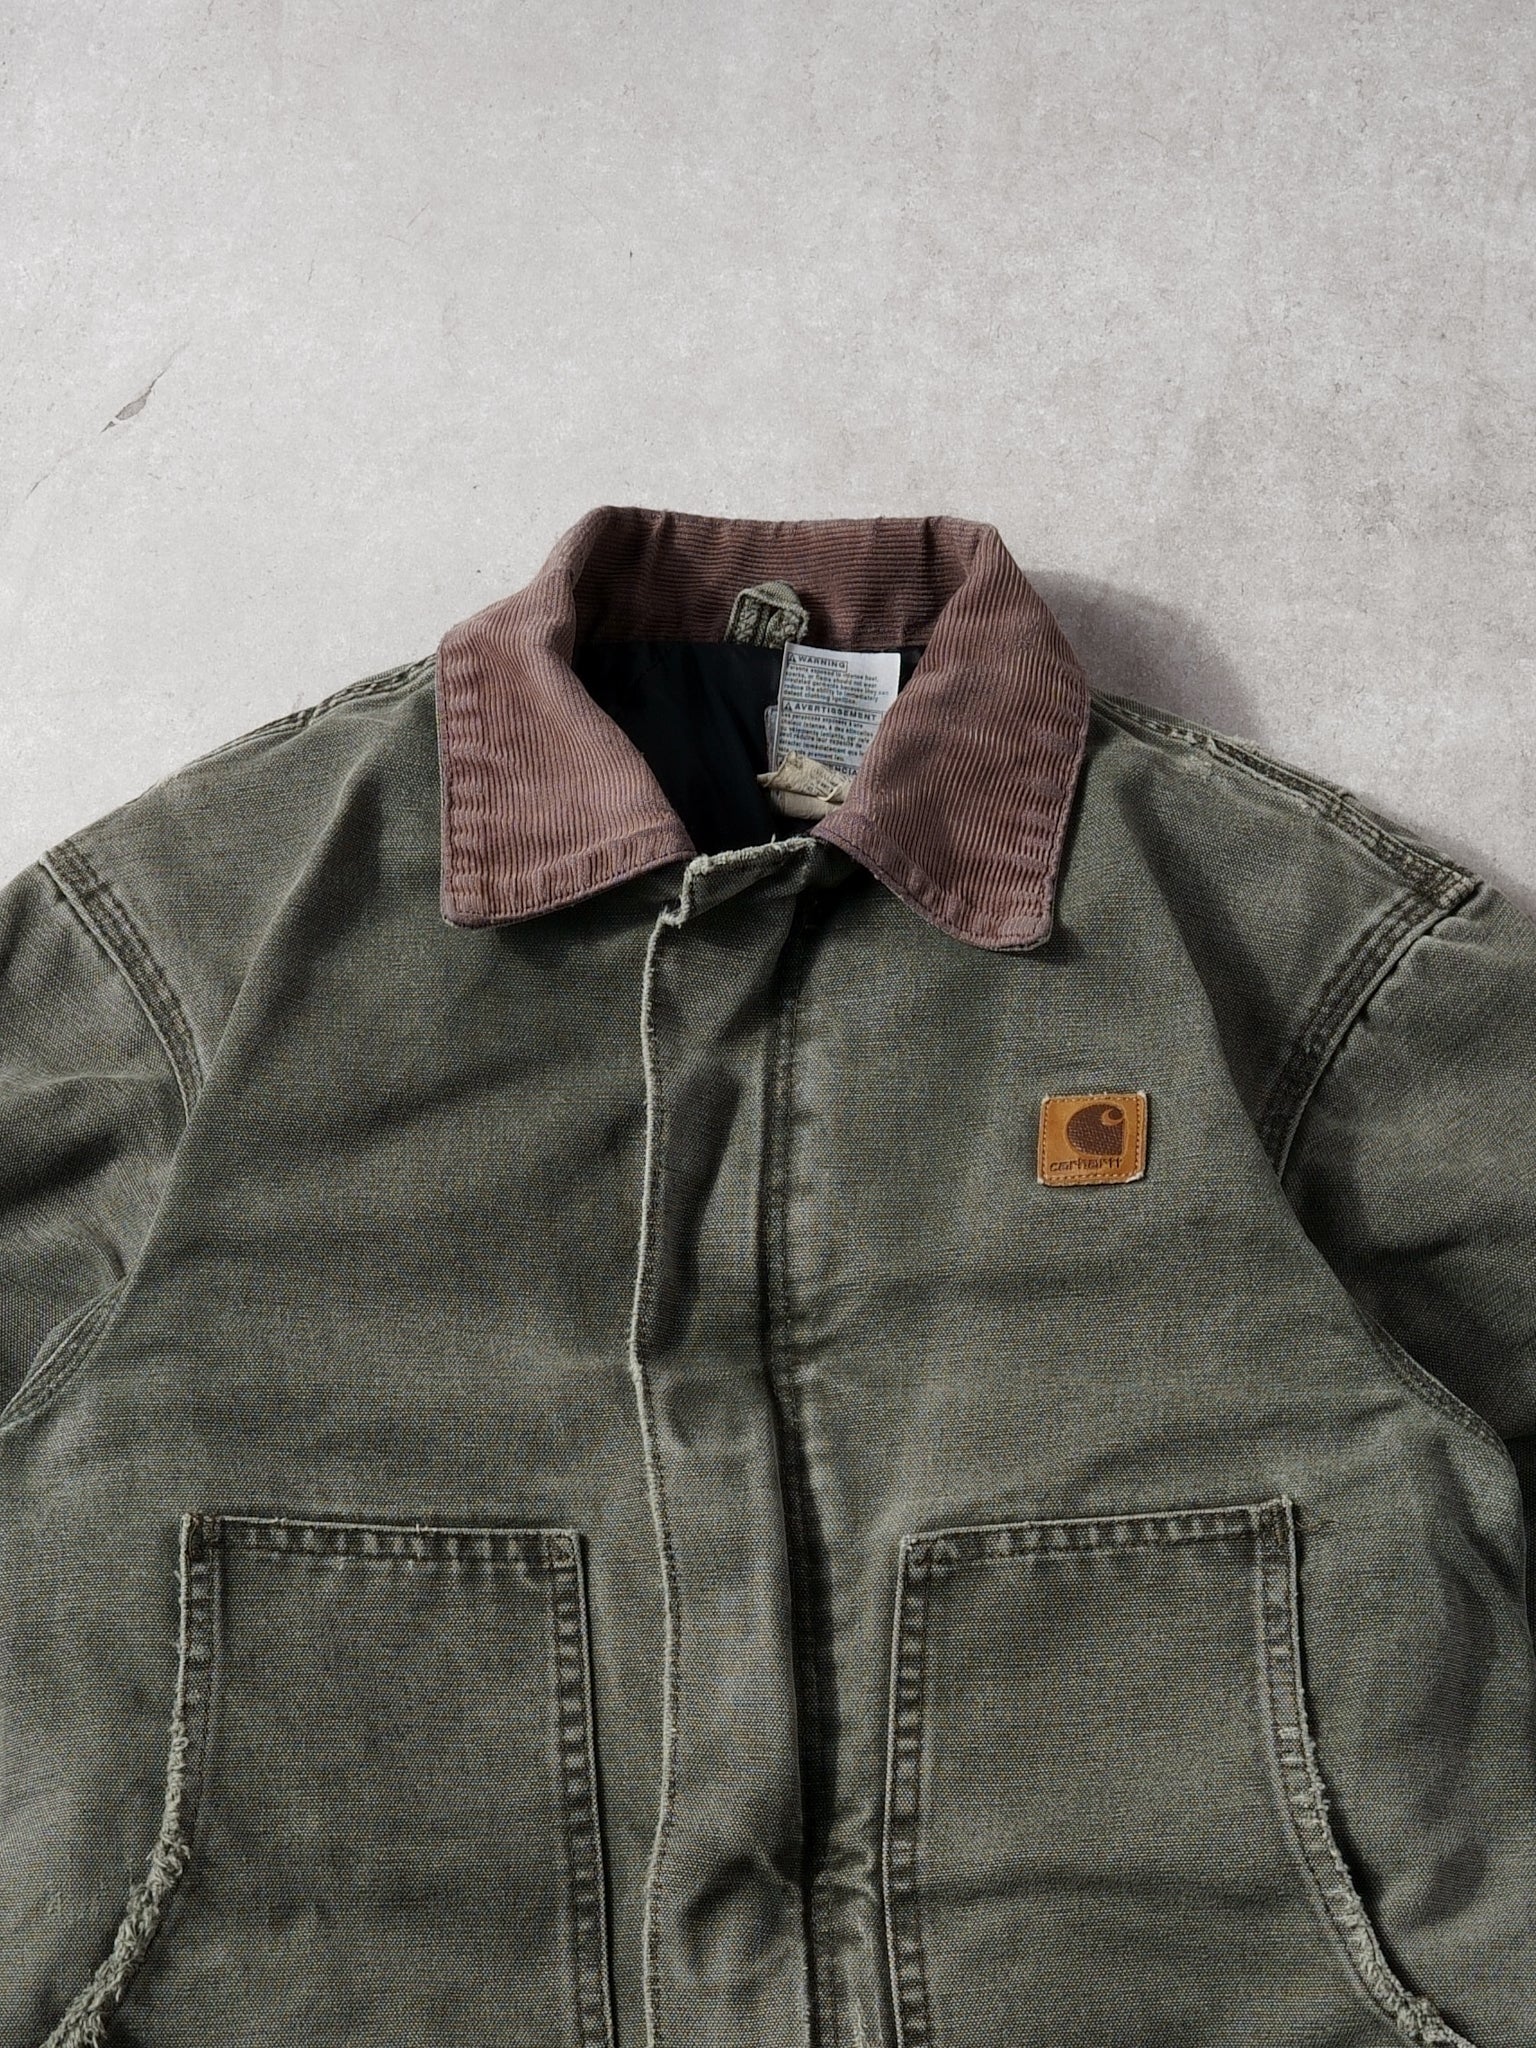 Vintage 90s Faded Green Carhartt Collared Workwear Jacket (S/M)